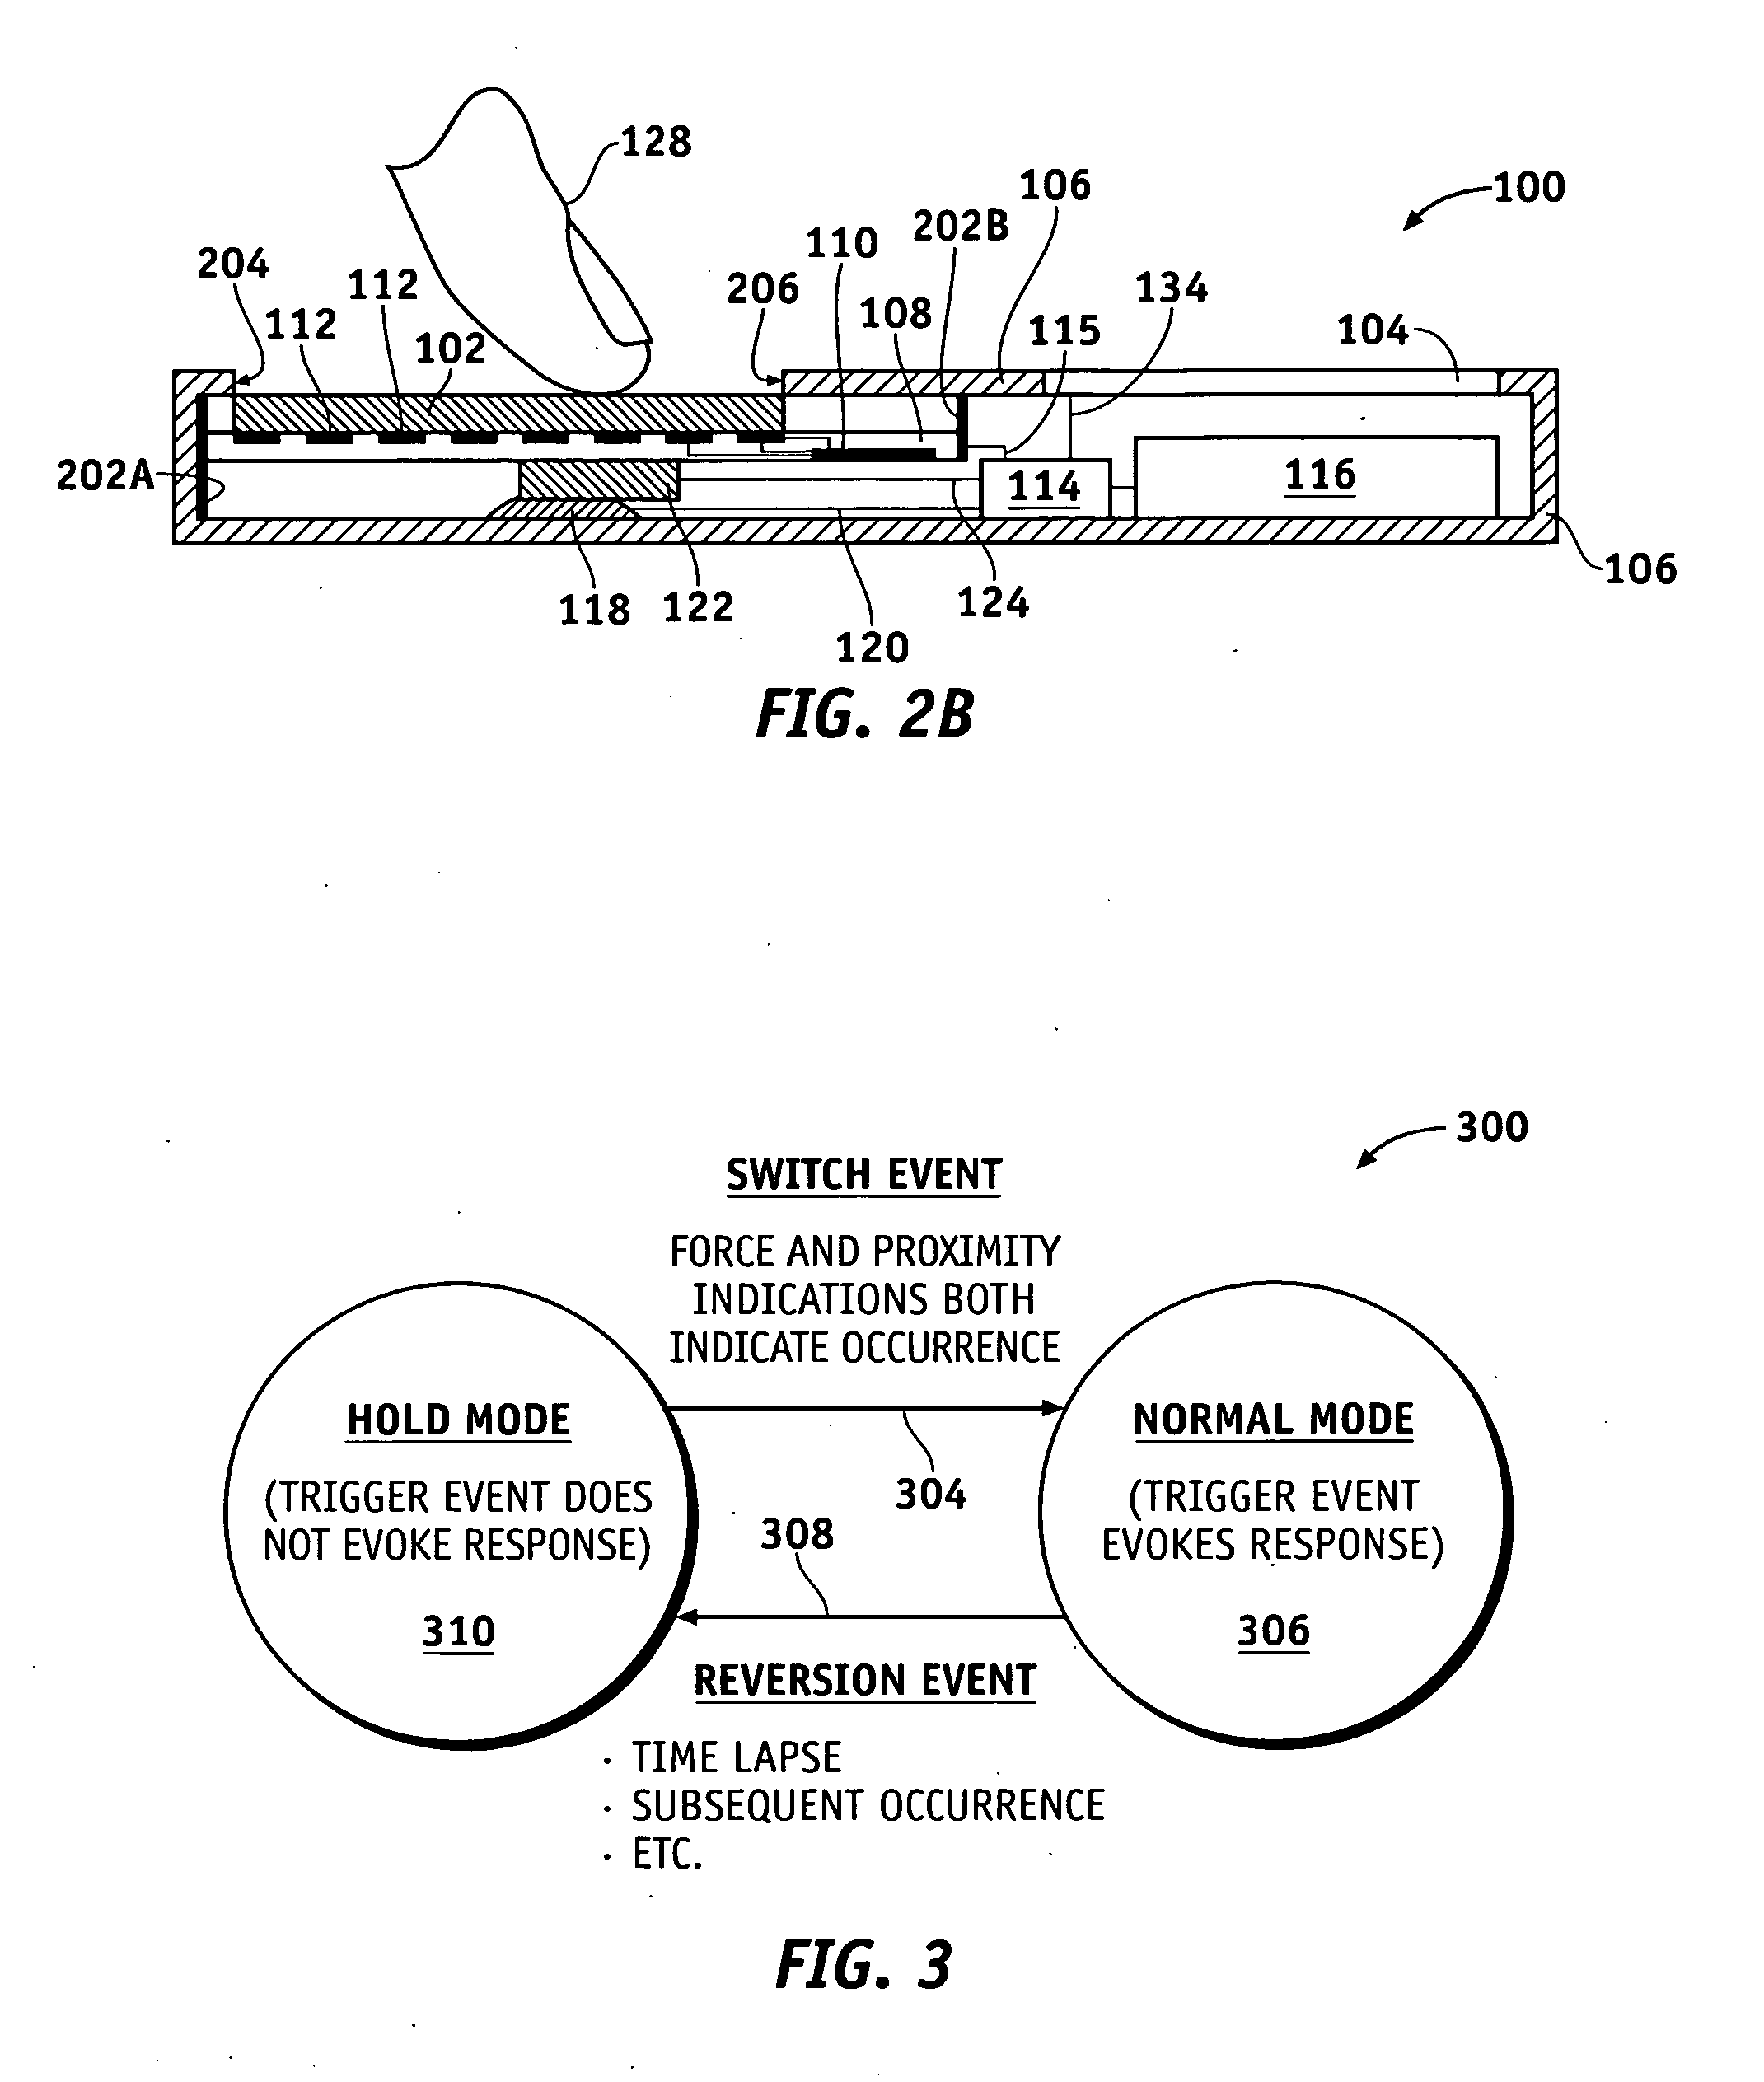 Methods and systems for implementing modal changes in a device in response to proximity and force indications